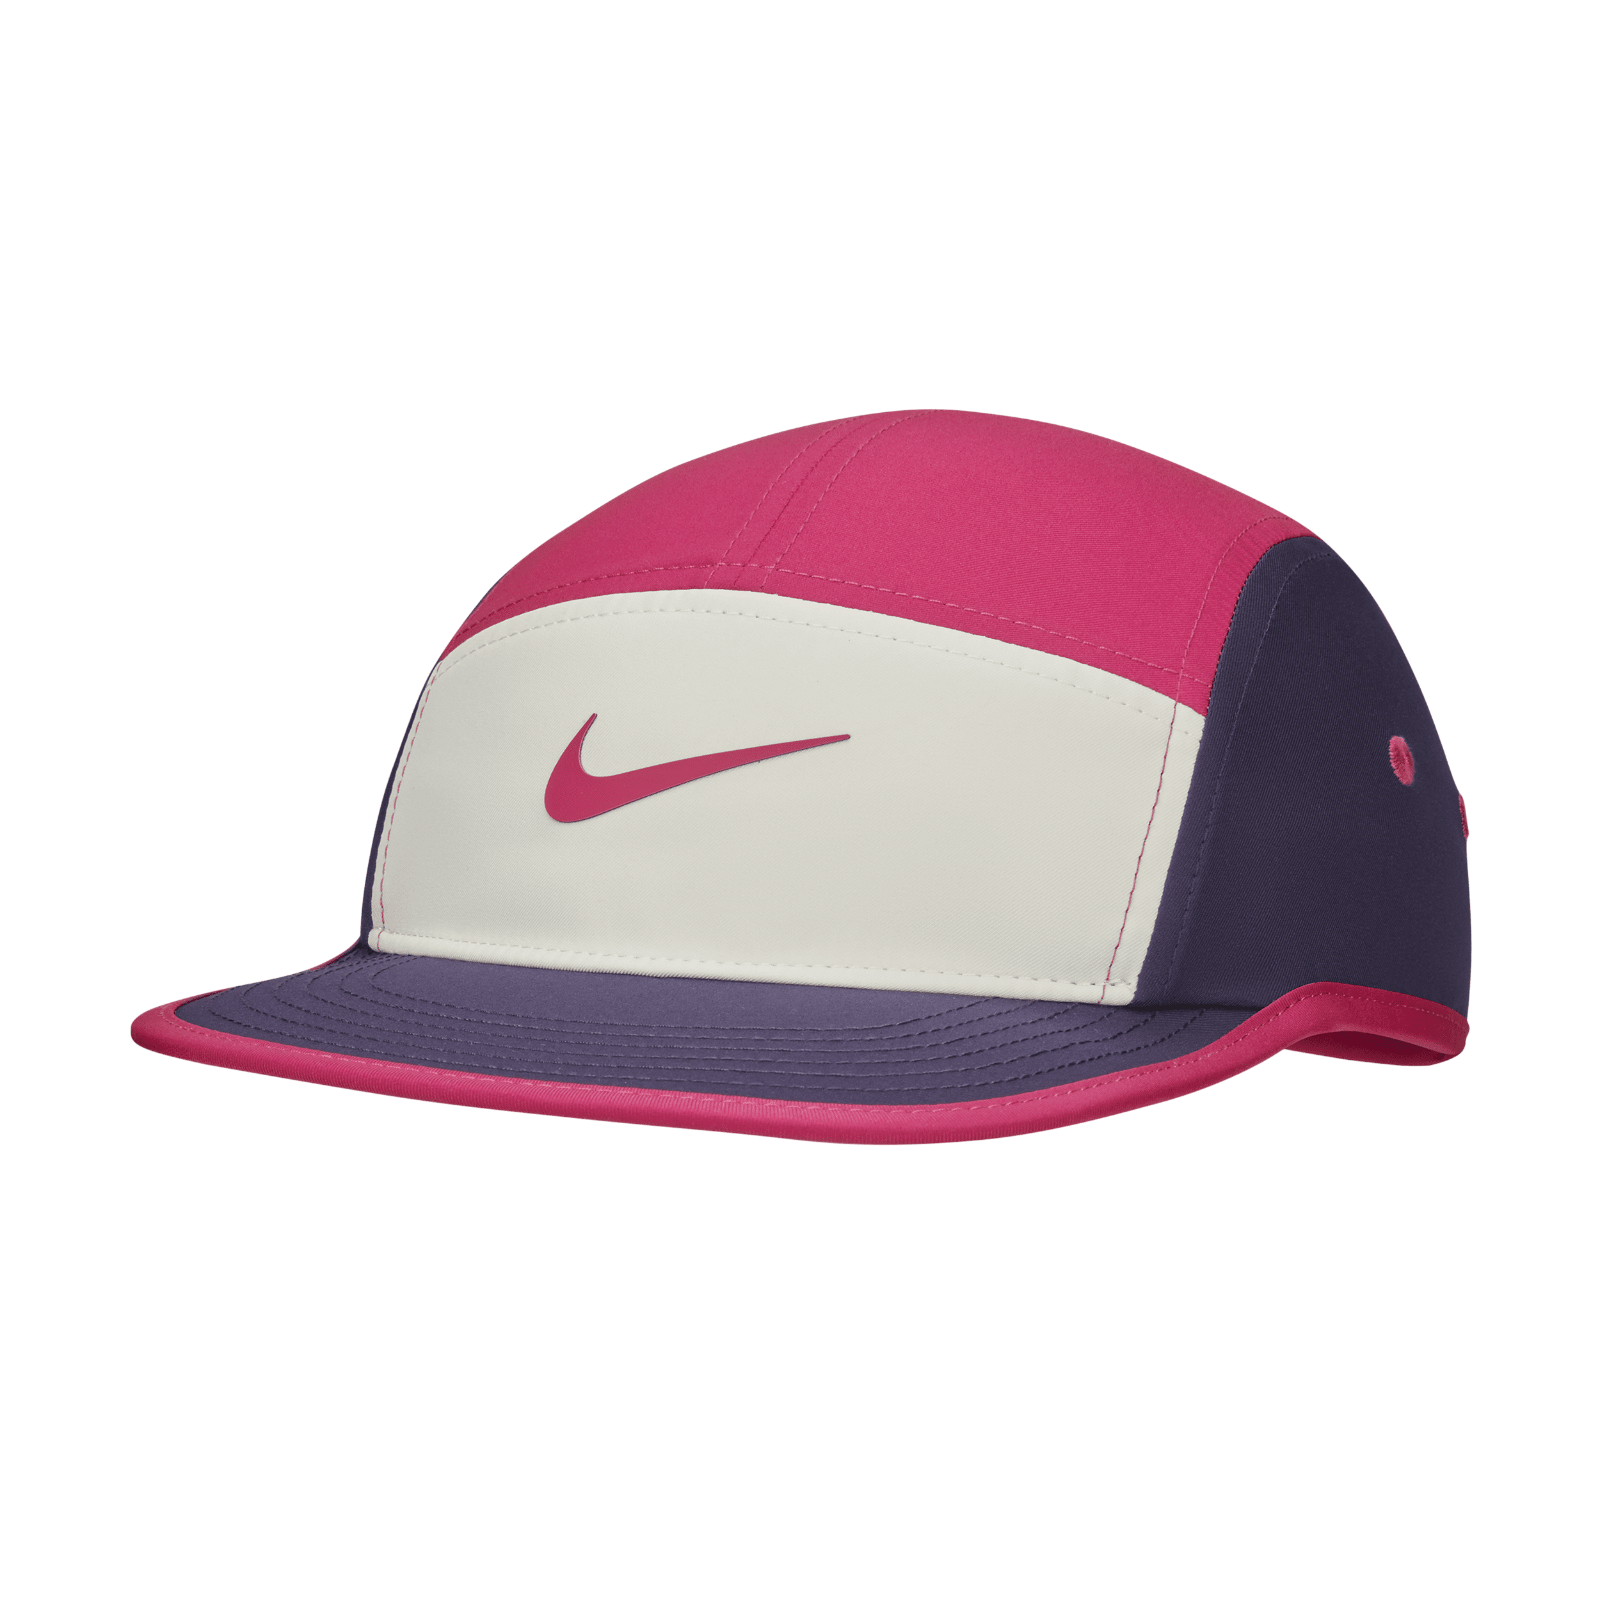 Nike Dri-FIT Fly Unstructured Swoosh Cap.